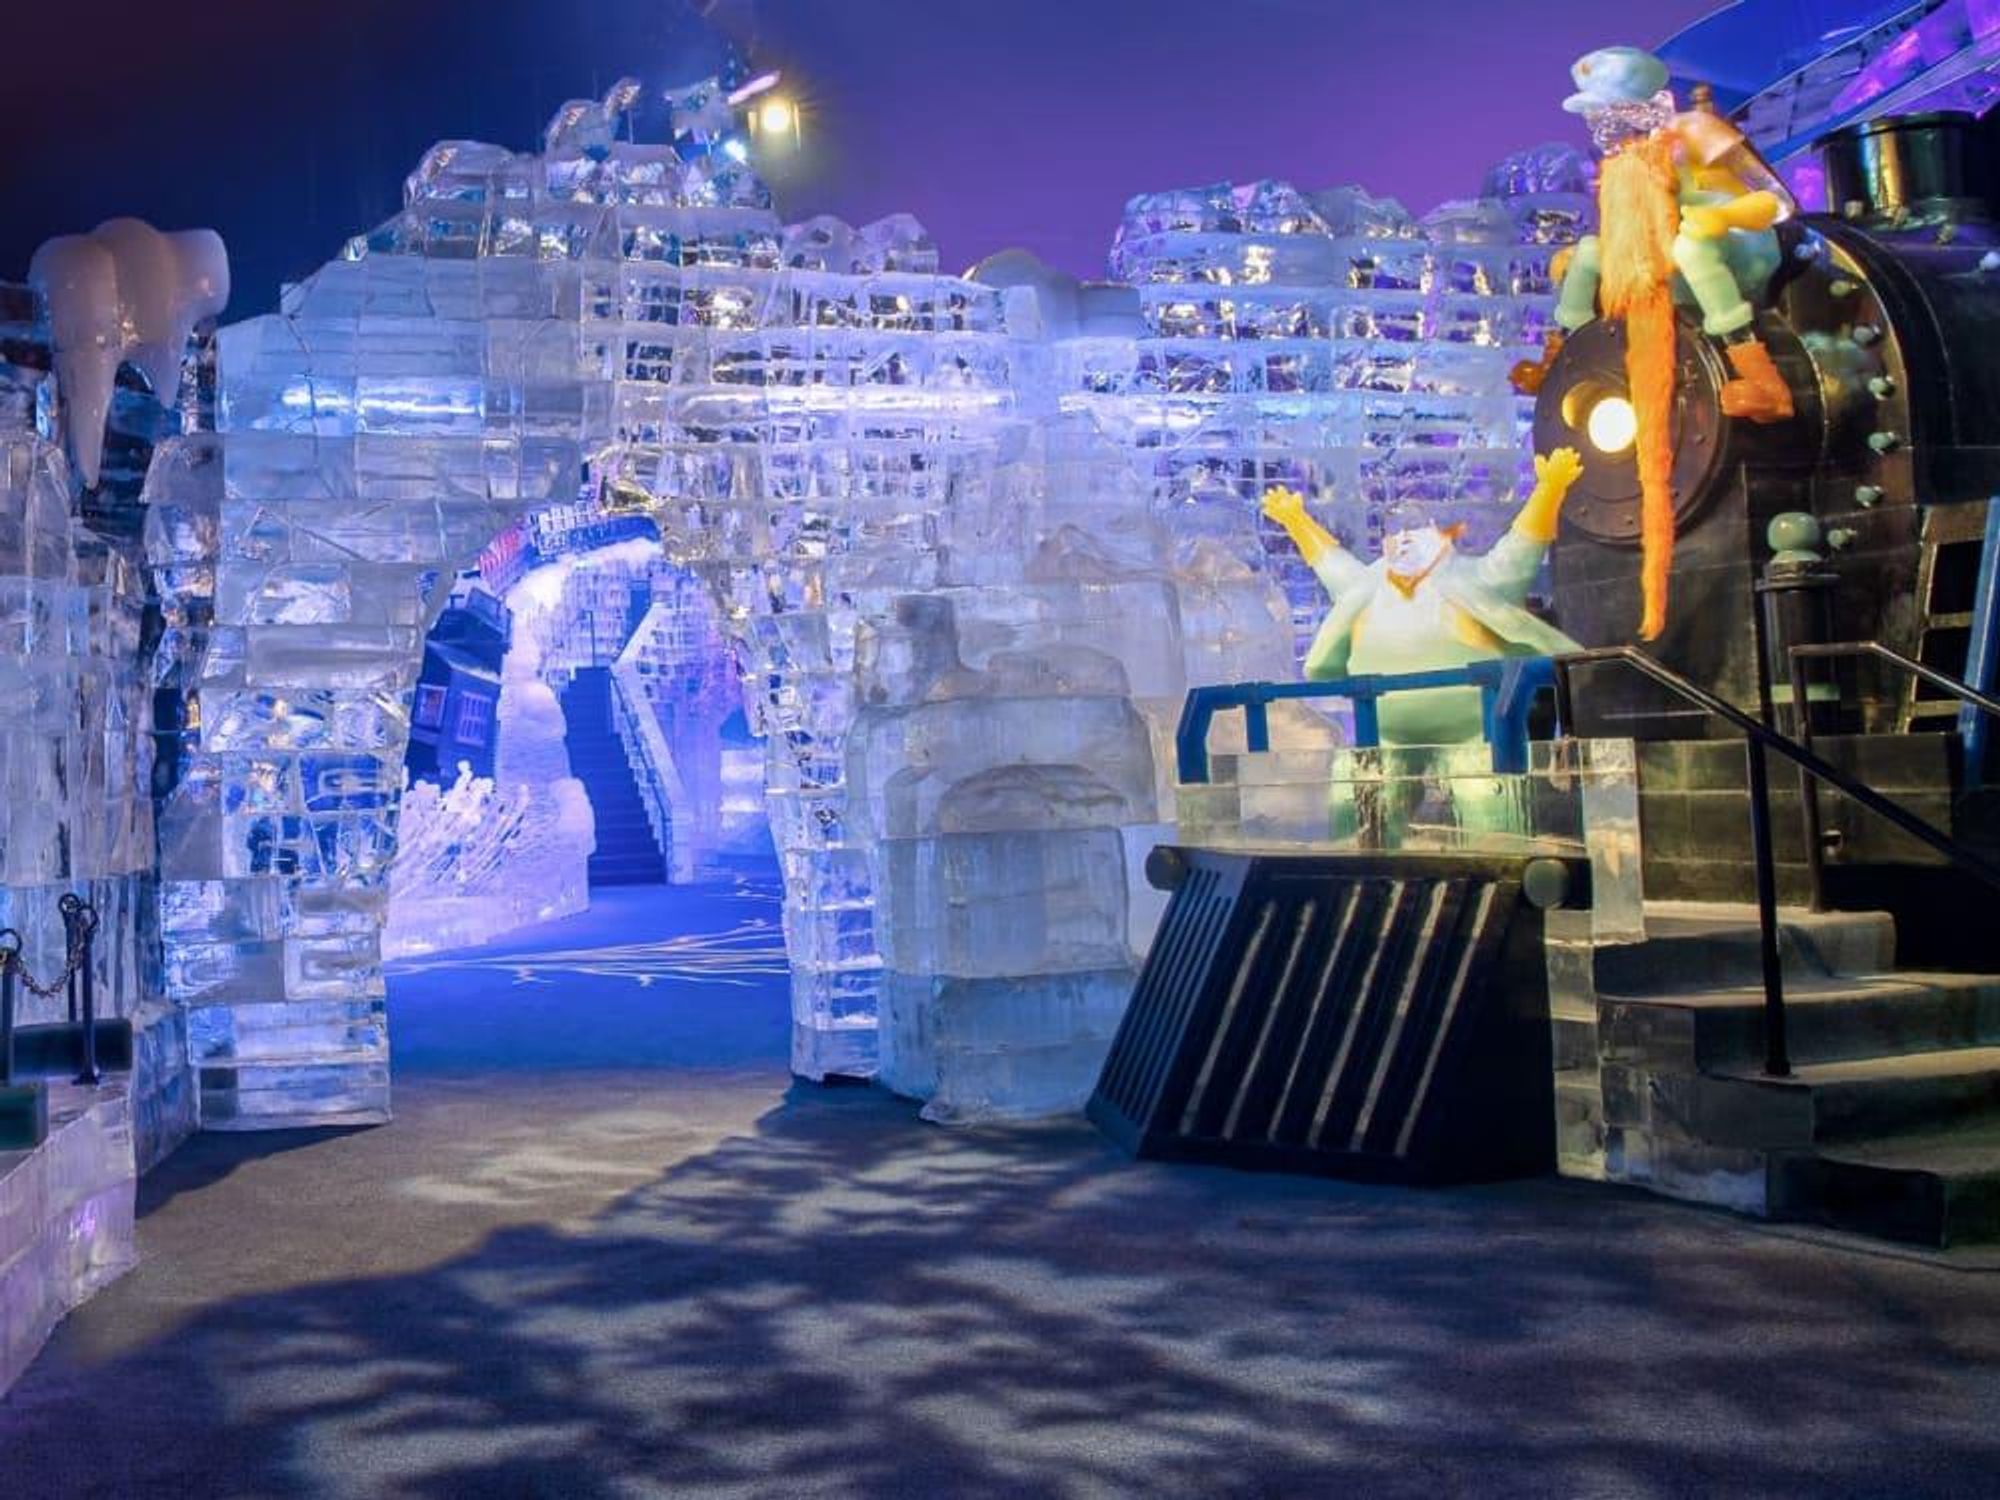 ICE! holiday sensation returns to Gaylord Texan Grapevine after 2year freeze out CultureMap